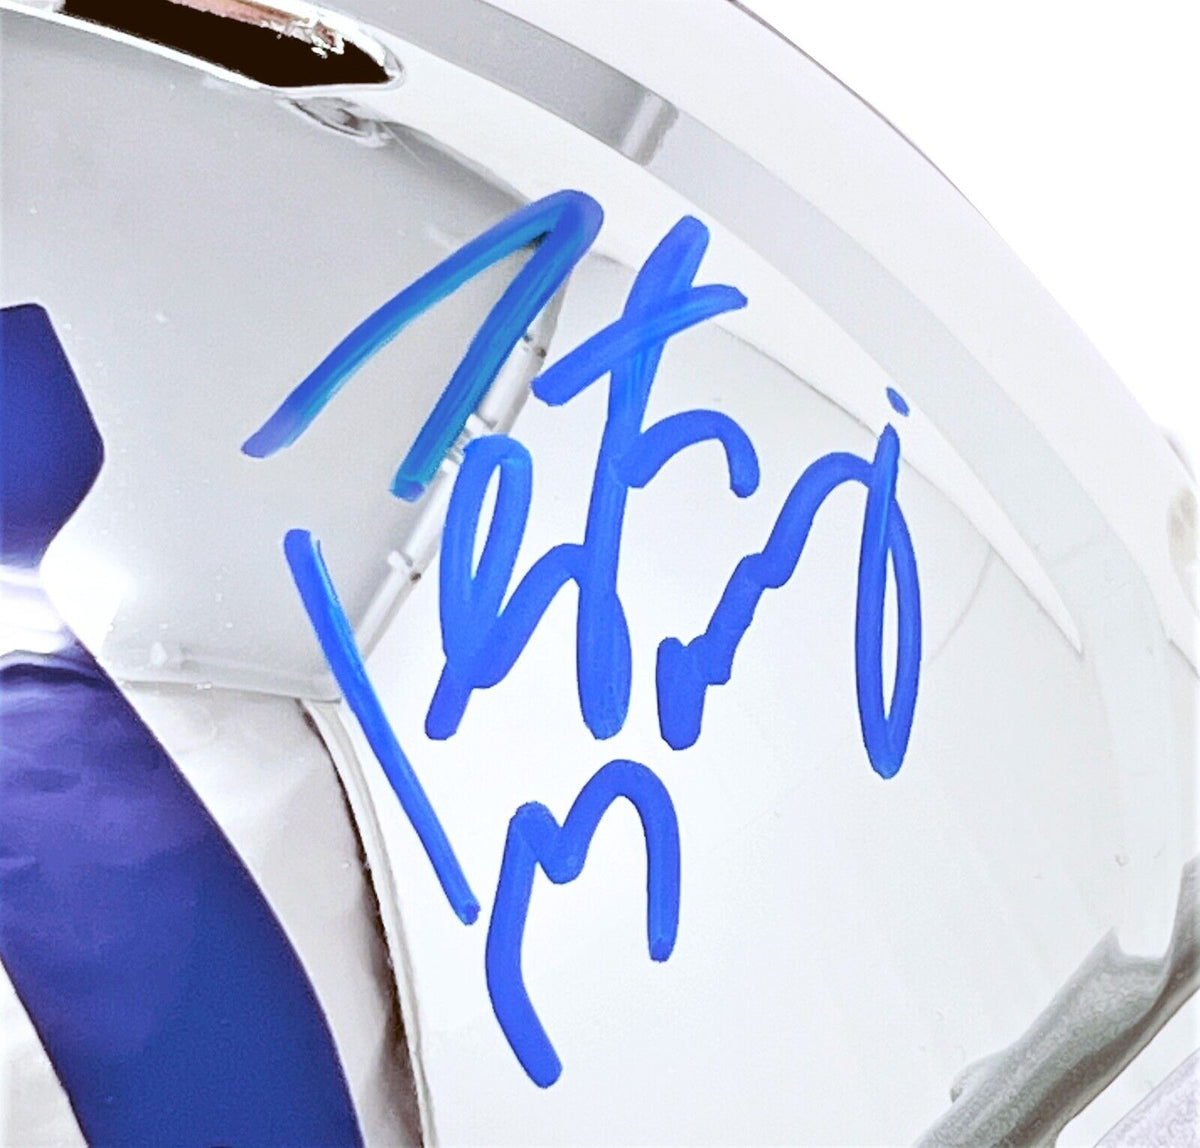 PEYTON MANNING COLTS AUTOGRAPHED CHROME SPEED REPLICA HELMET SIGNED IN